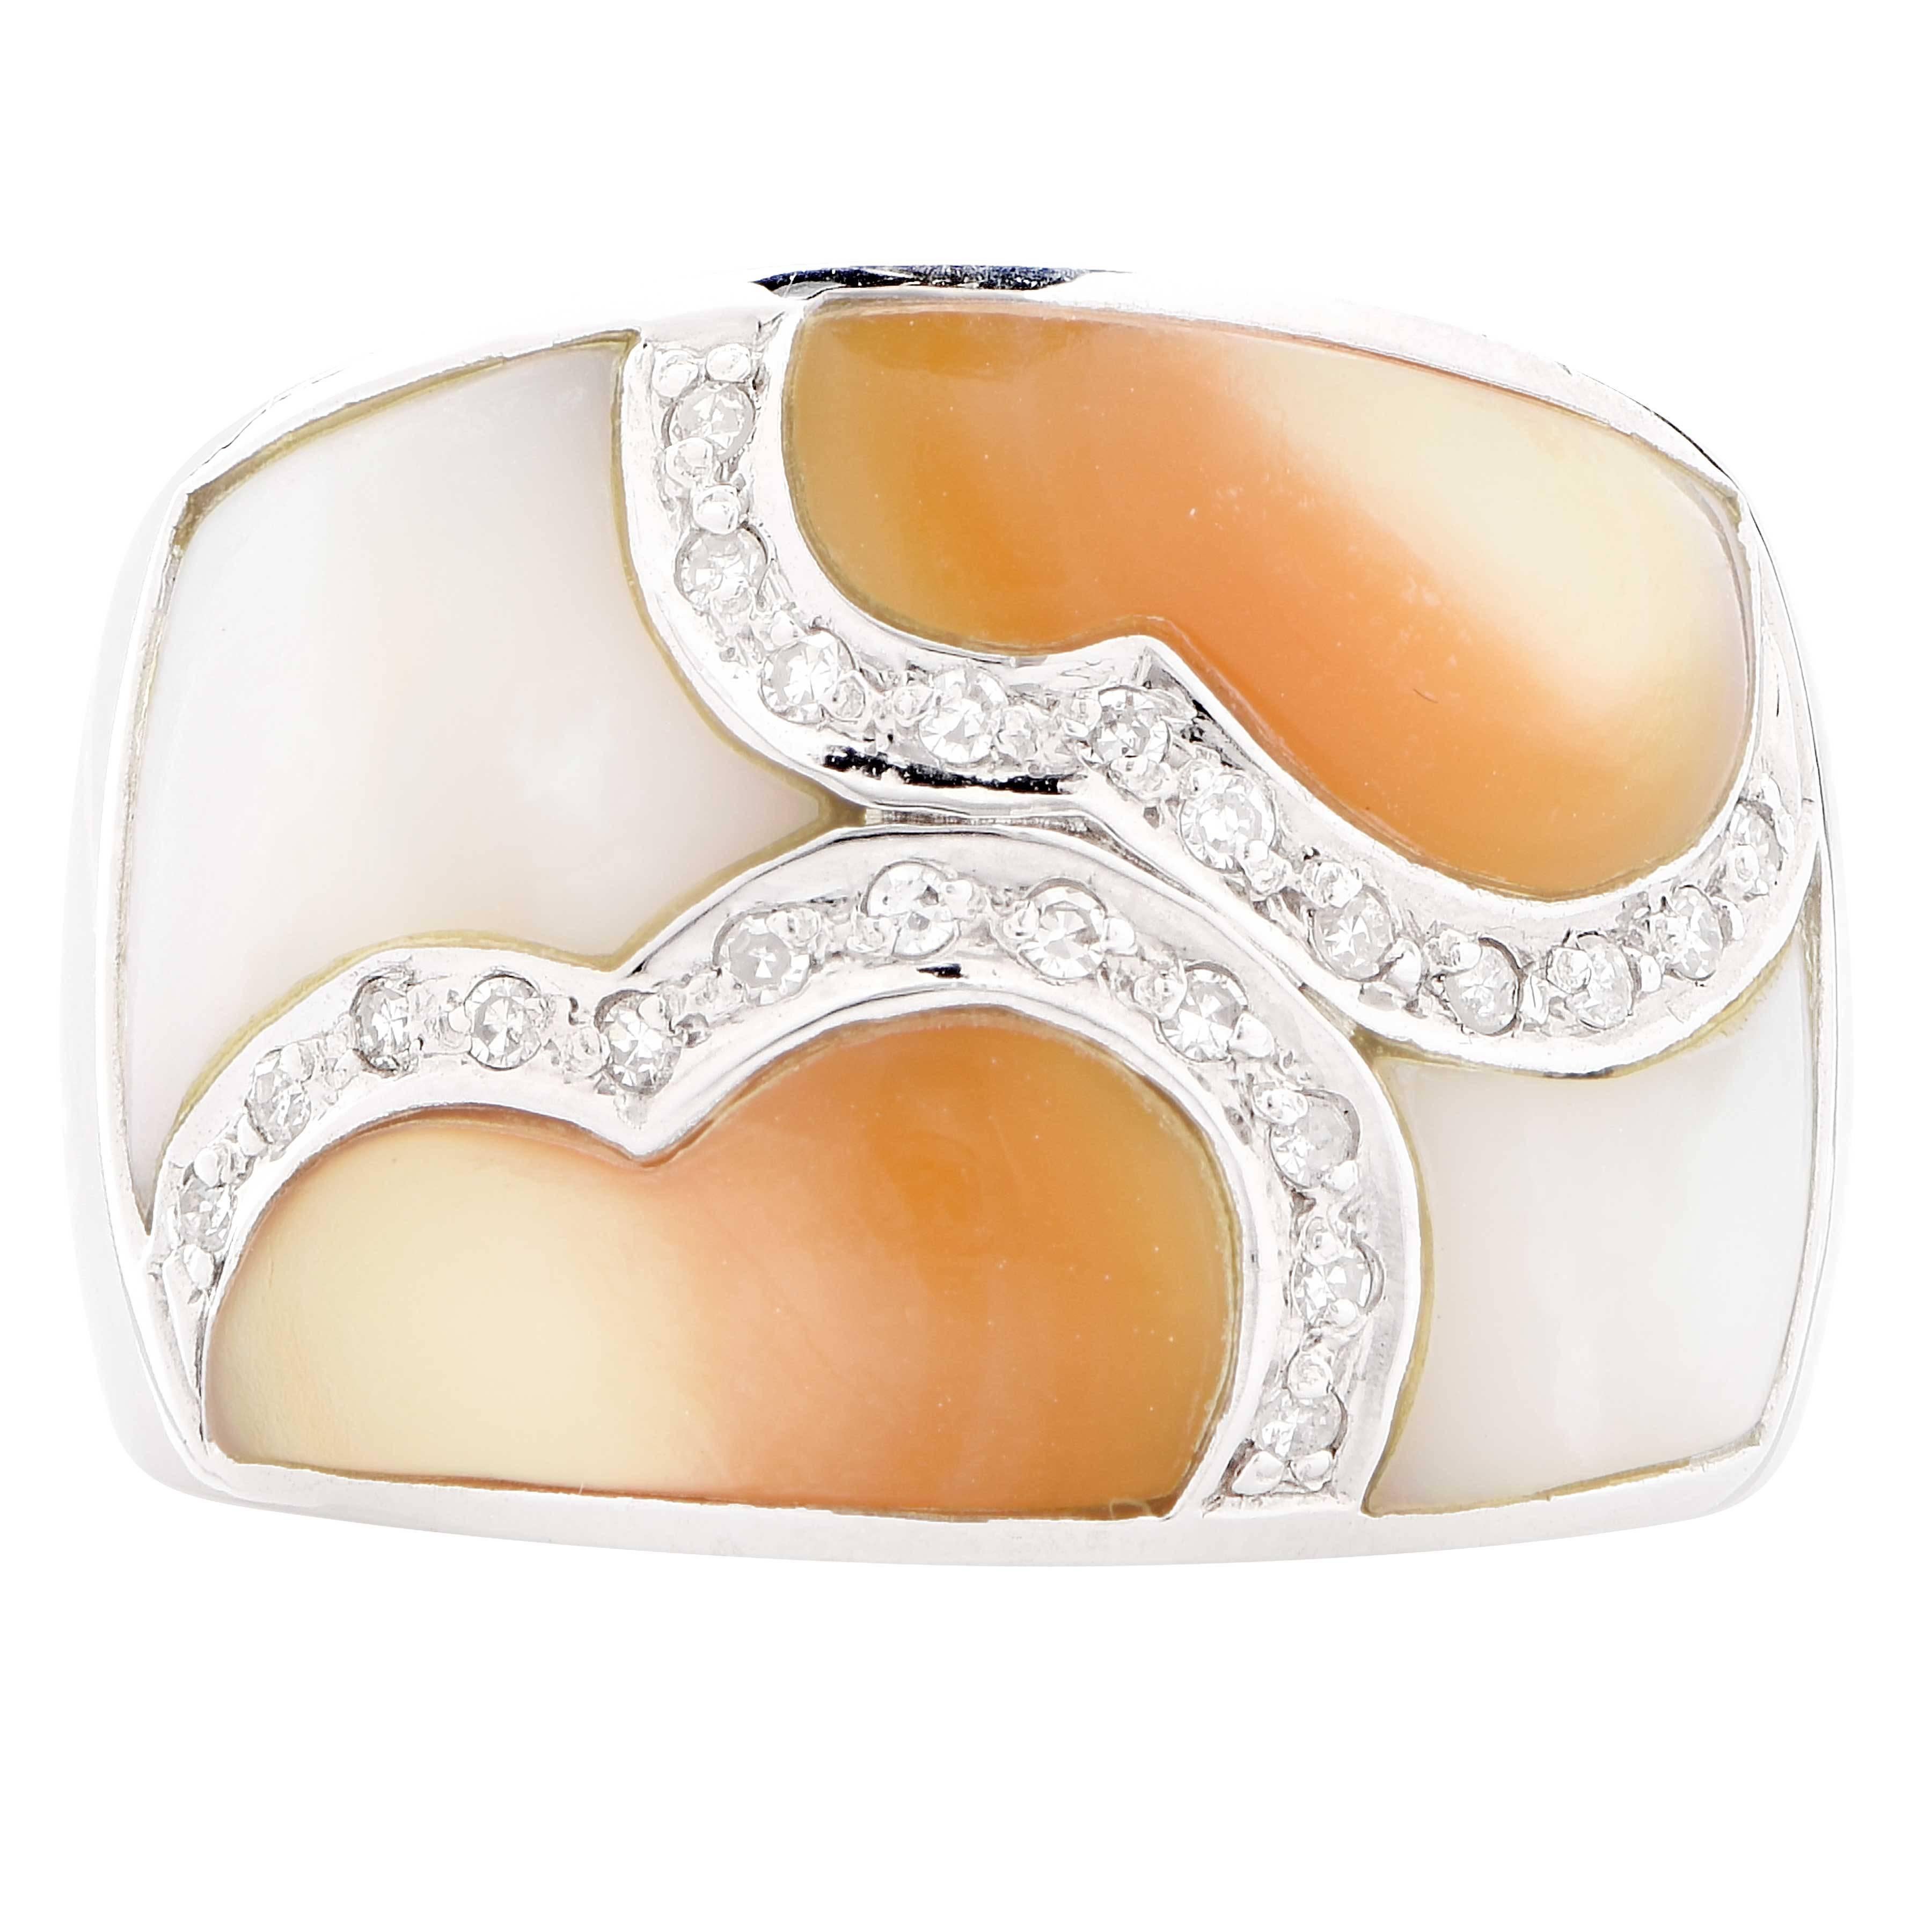 This lovely fashion ring features four enamel panels as well as 23 round cut diamonds with an estimated total weight of .23 carat set in 14 karat white gold.

Ring Size: 6 3/4 (can be sized)
Metal Type: 14 Karat White Gold
 